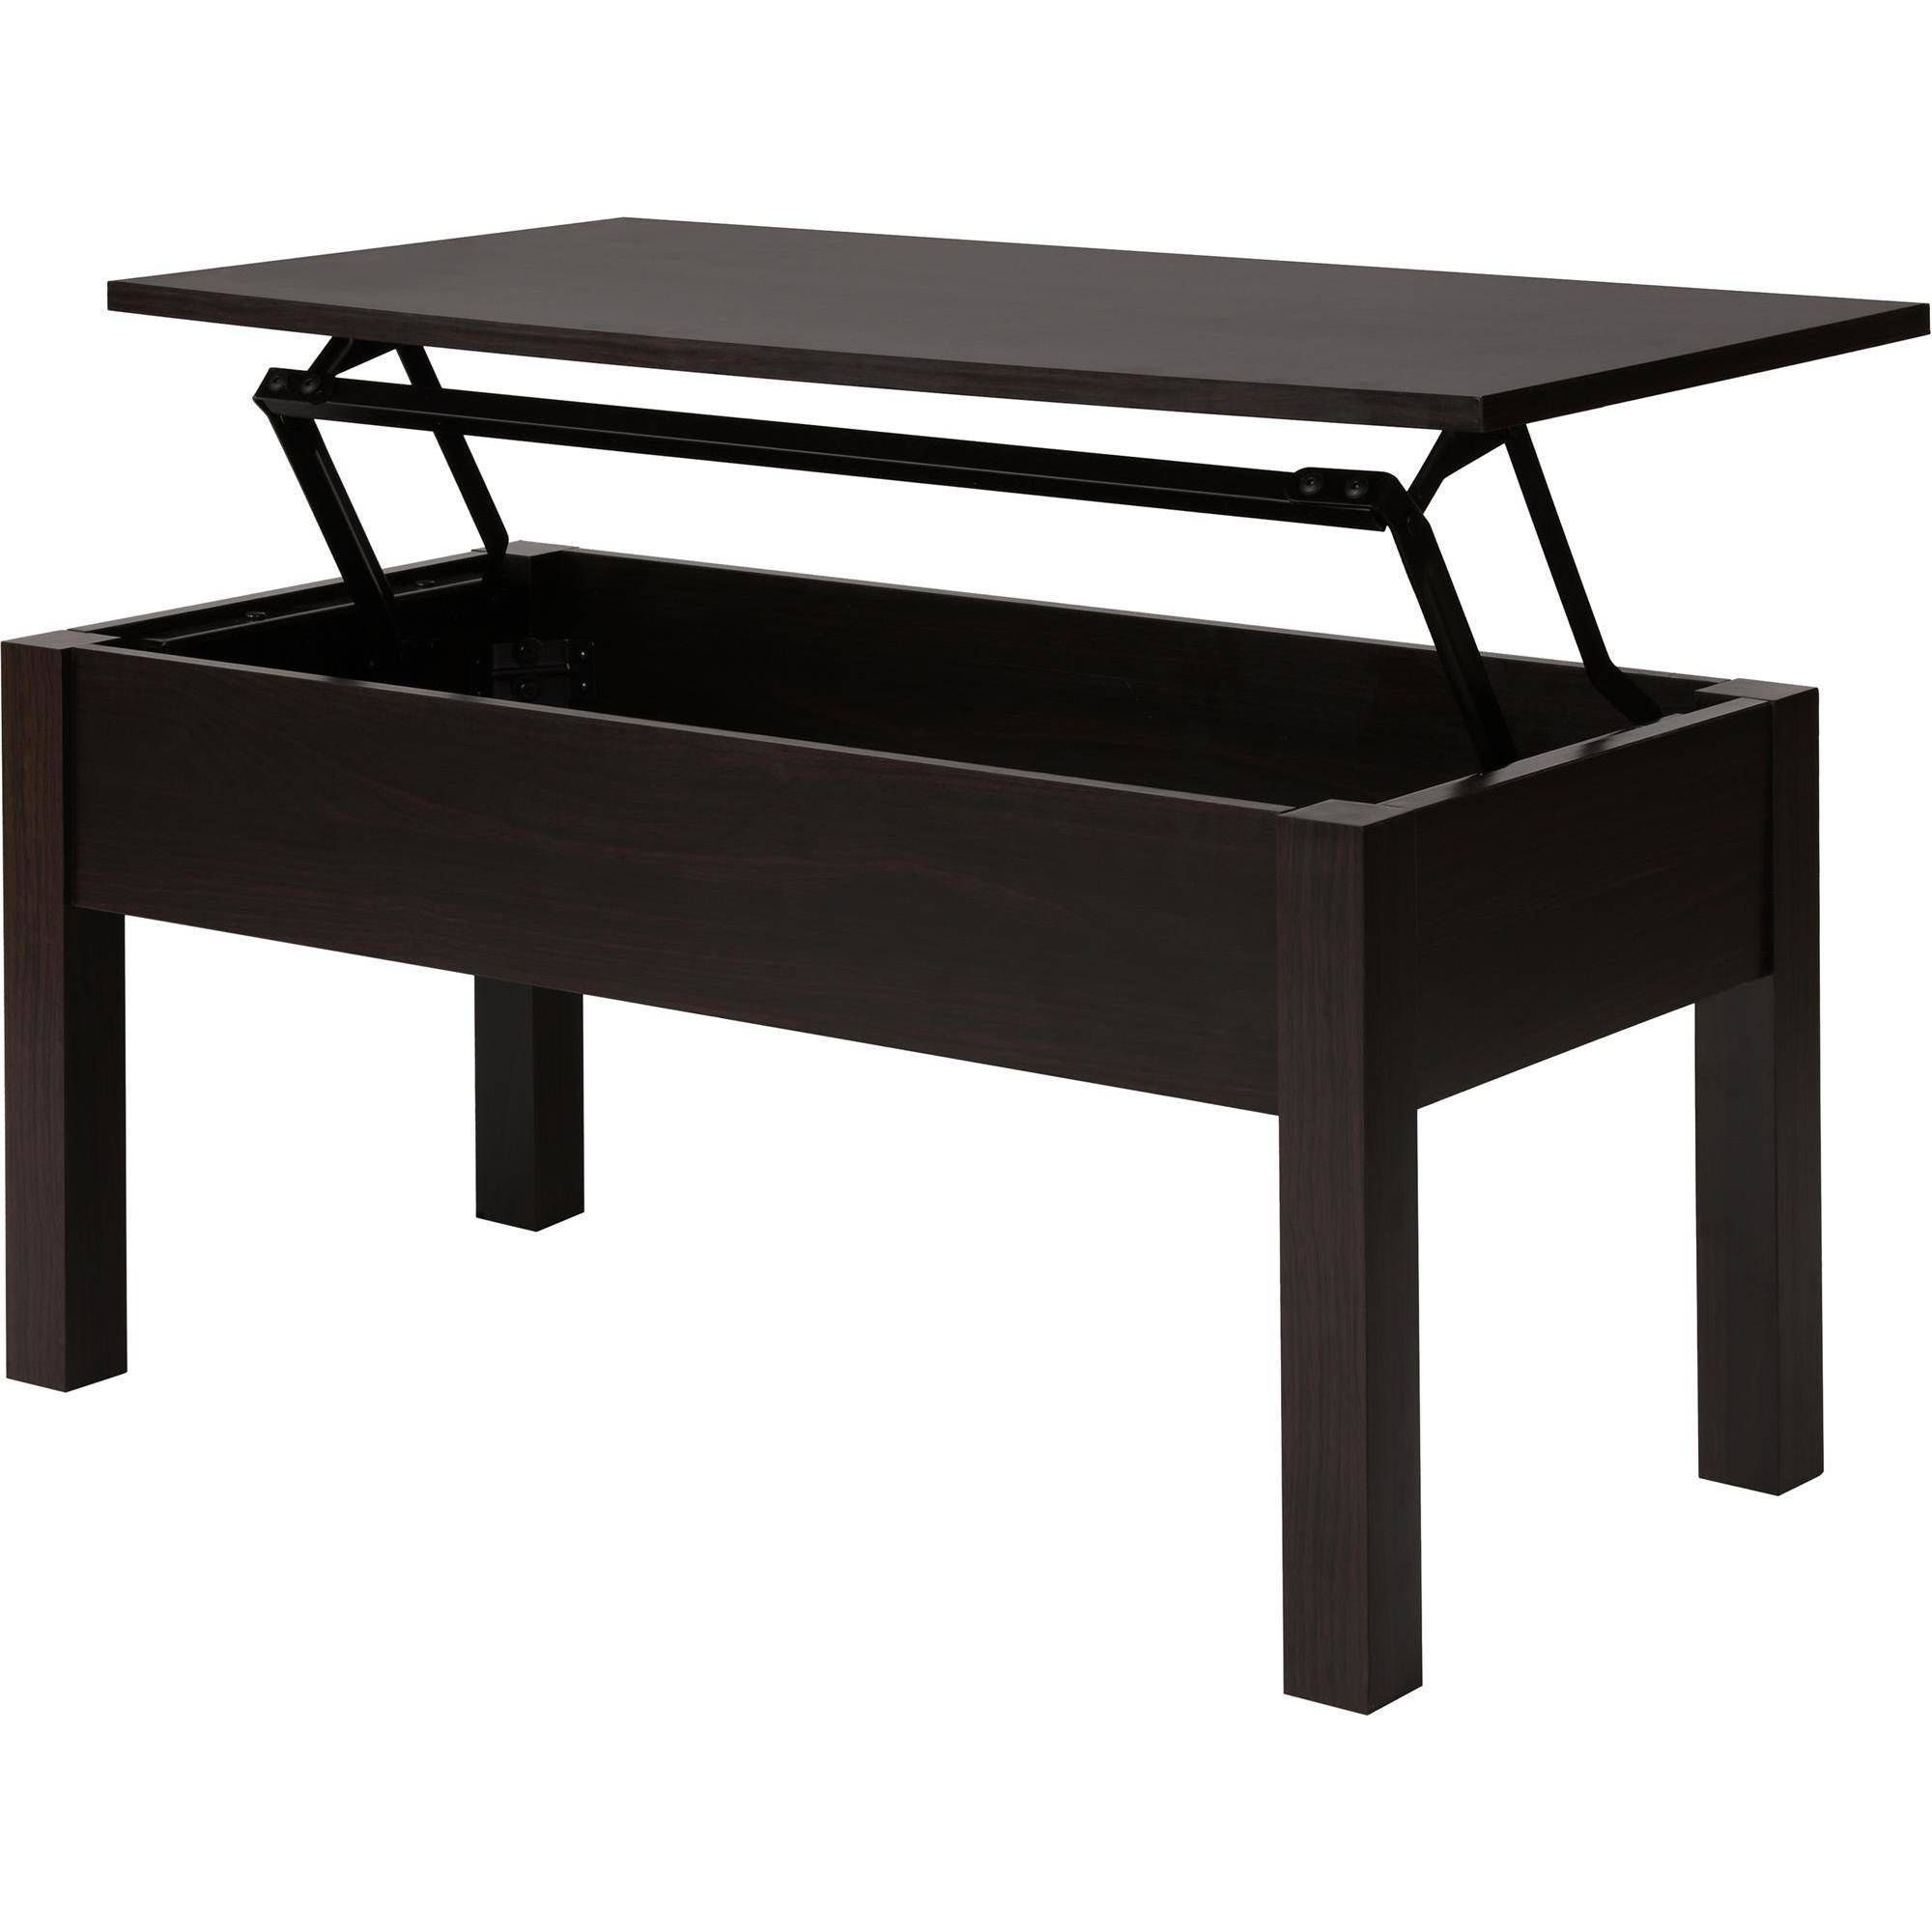 Recent Jaxon Grey Lift Top Cocktail Tables Within Lovely Table Top Coffee Loon Peak Bryan Lift Reviews Wayfair – Just (Gallery 4 of 20)